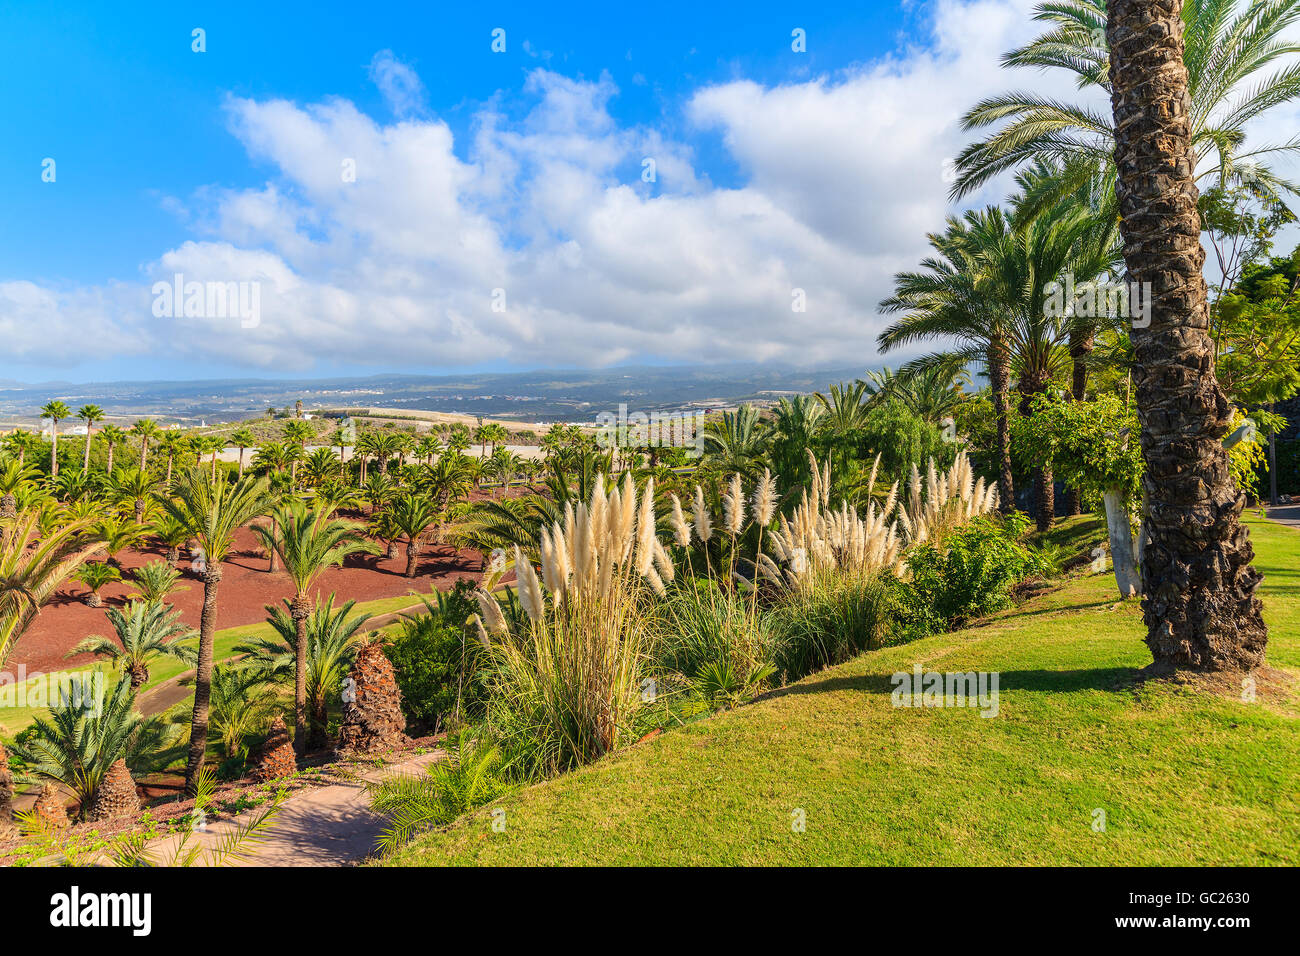 A view of tropical landscape with palm trees on Tenerife, Canary Islands, Spain Stock Photo